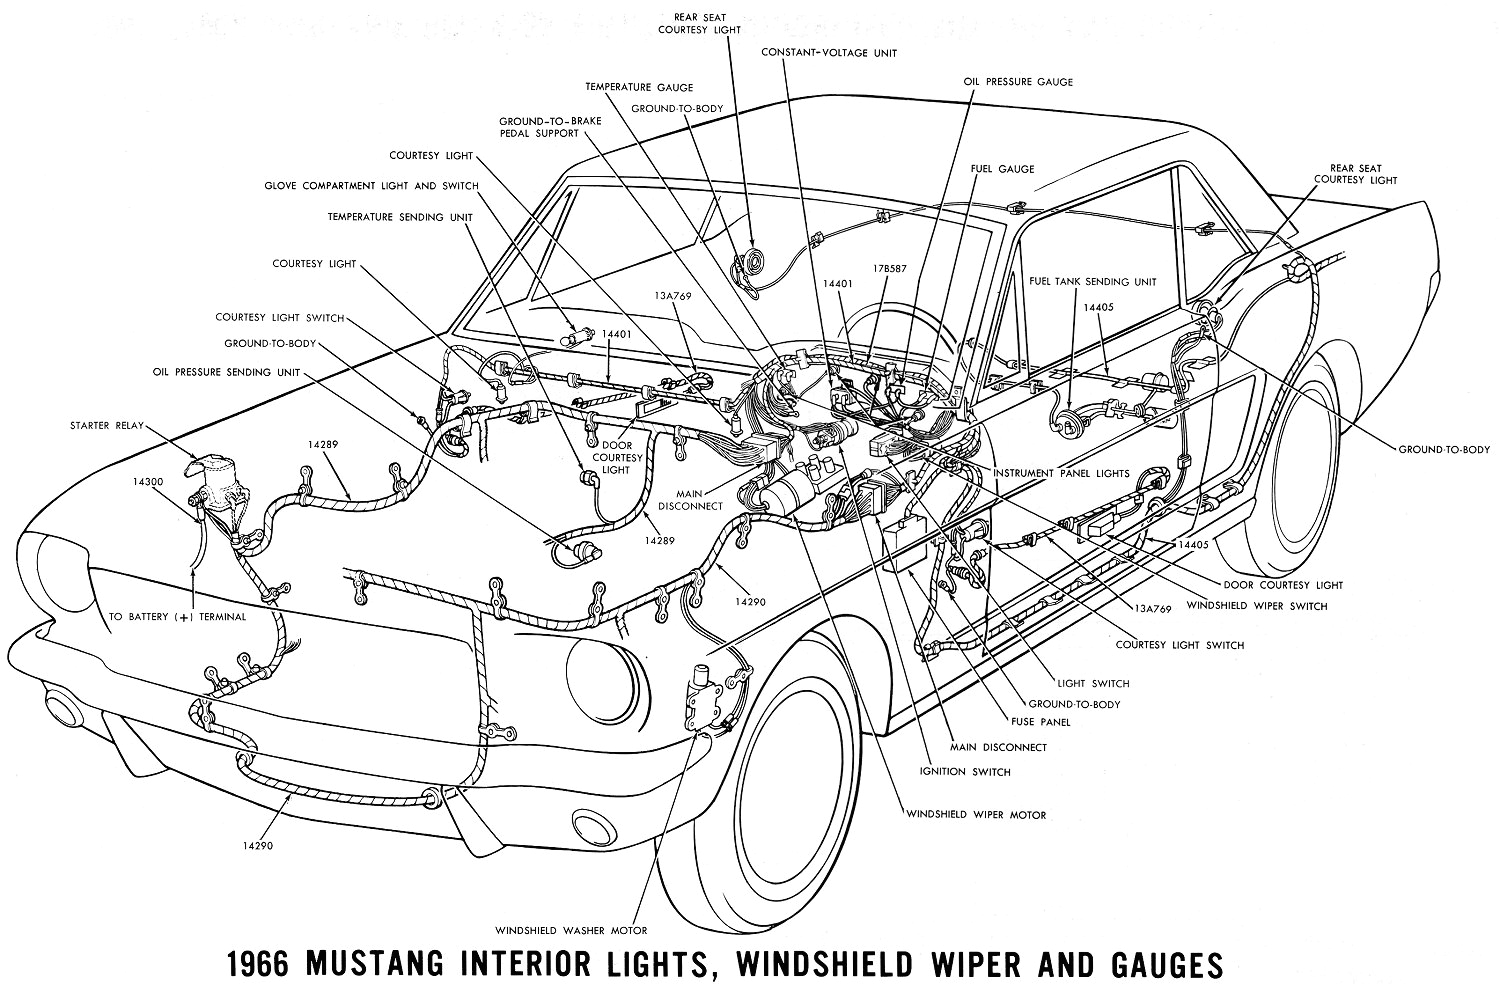 courtesy light wiring diagram for 1966 mustang